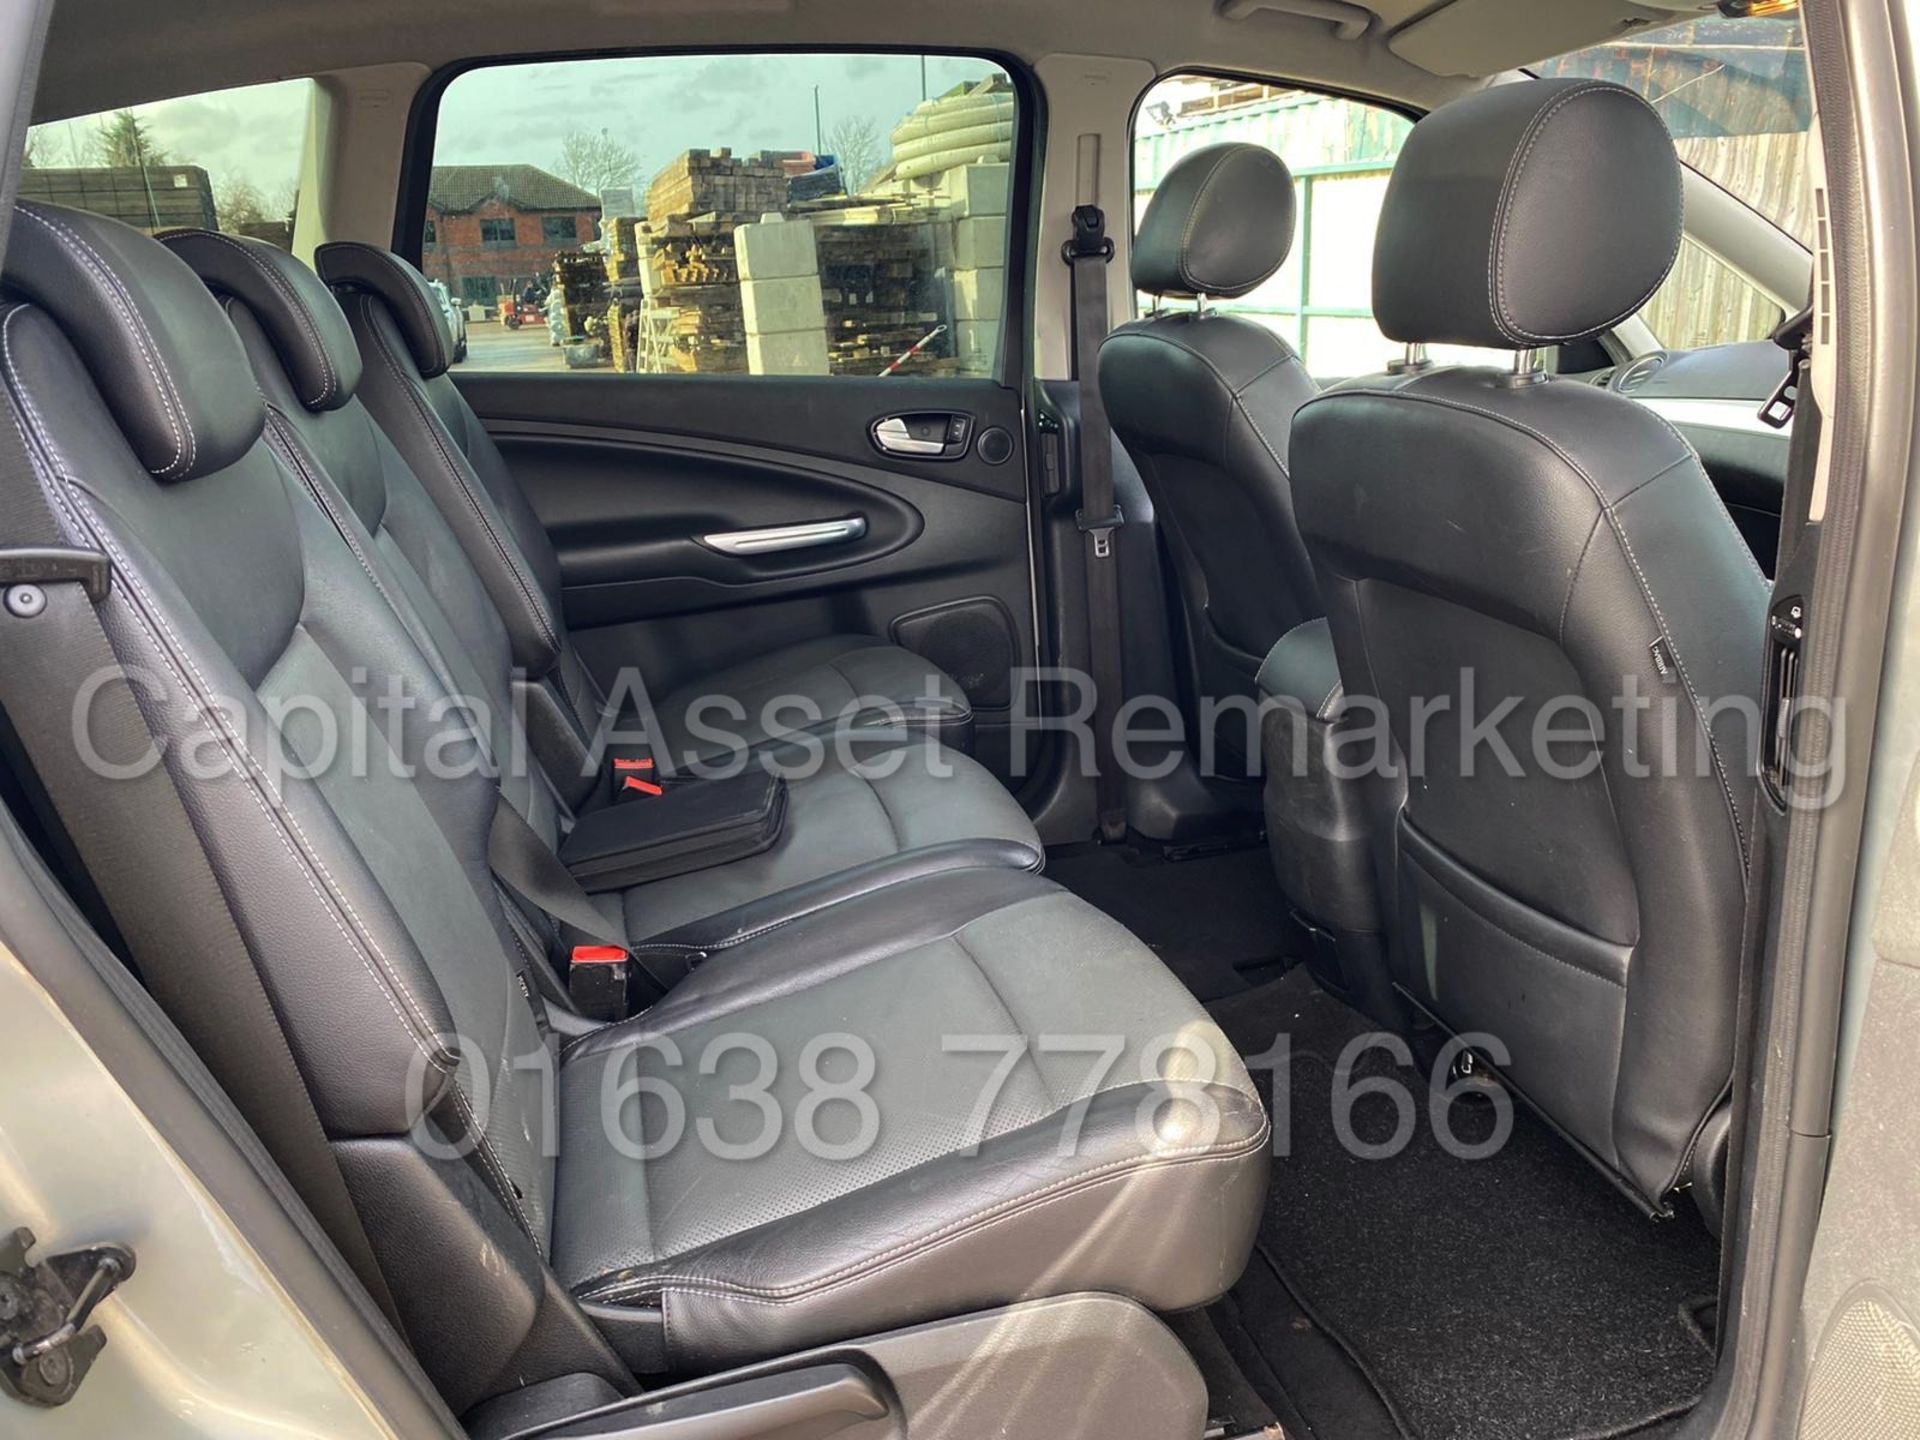 (On Sale) FORD S-MAX *ZETEC EDITION* 7 SEATER MPV (2010 MODEL) '1.8 TDCI - 6 SPEED' *A/C* (NO VAT) - Image 9 of 16